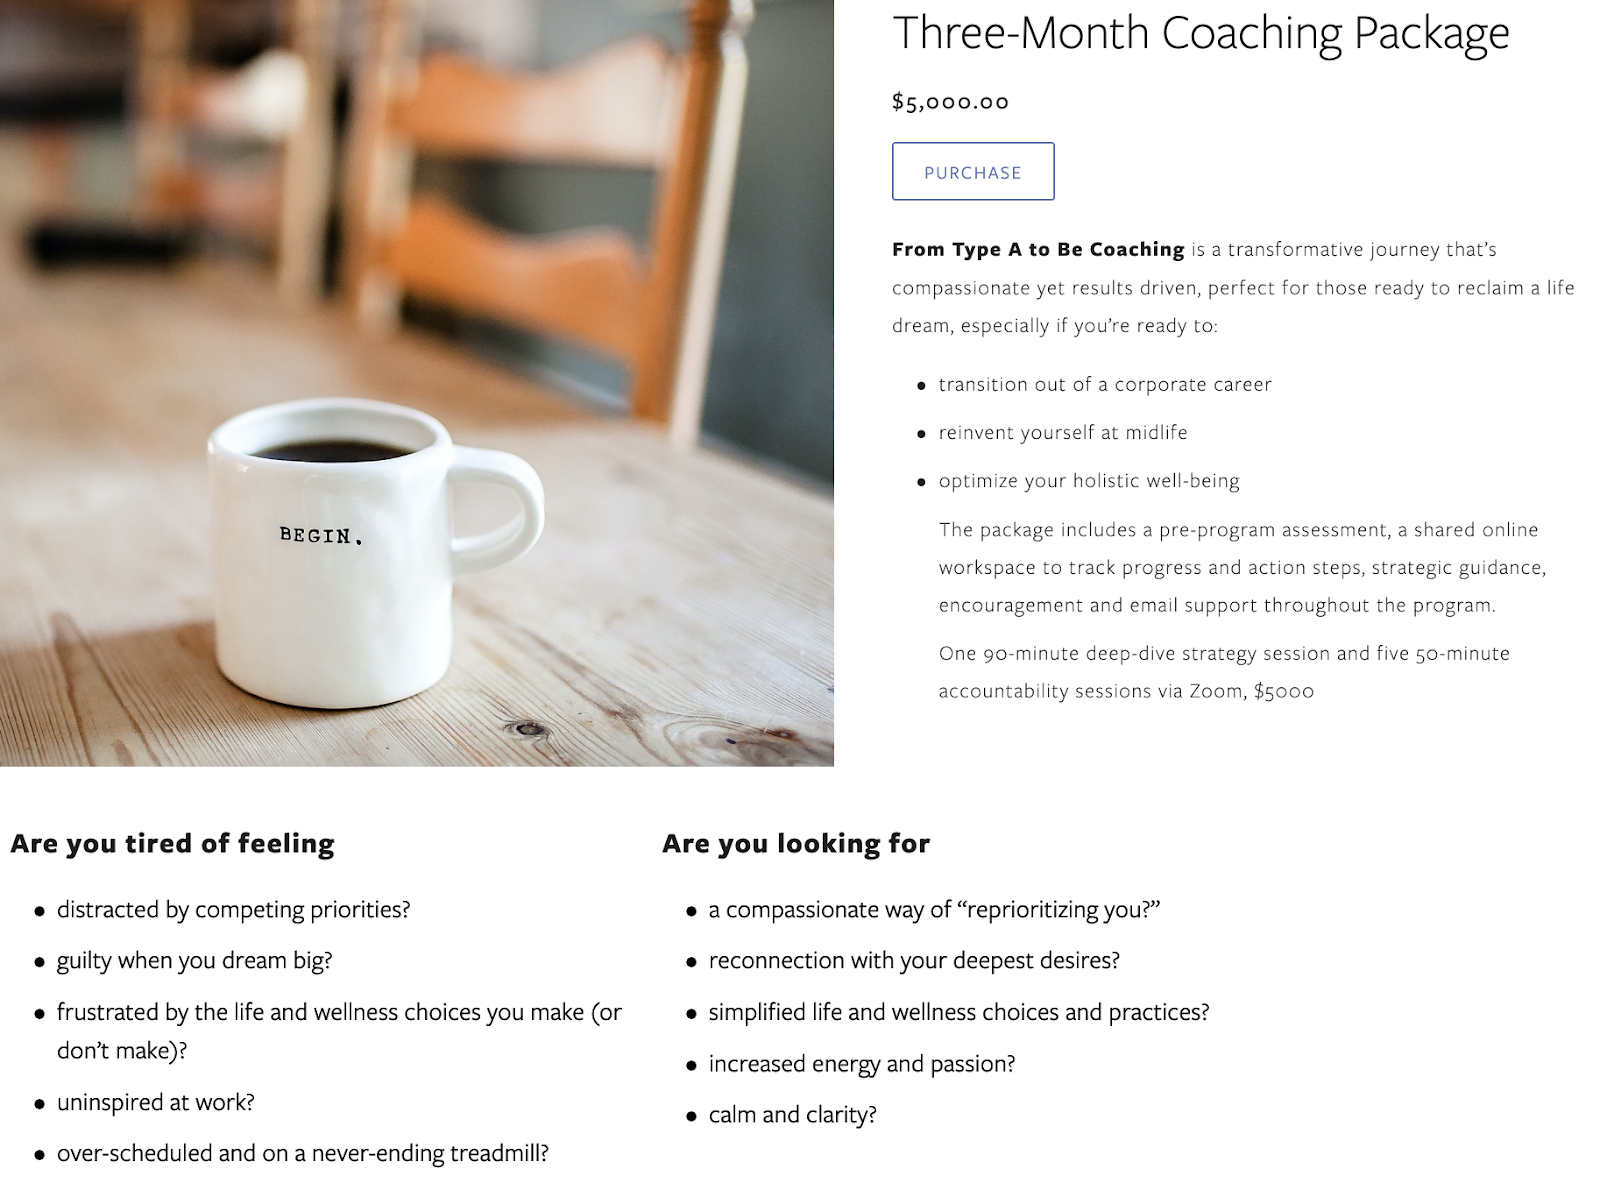 3 month coaching package example